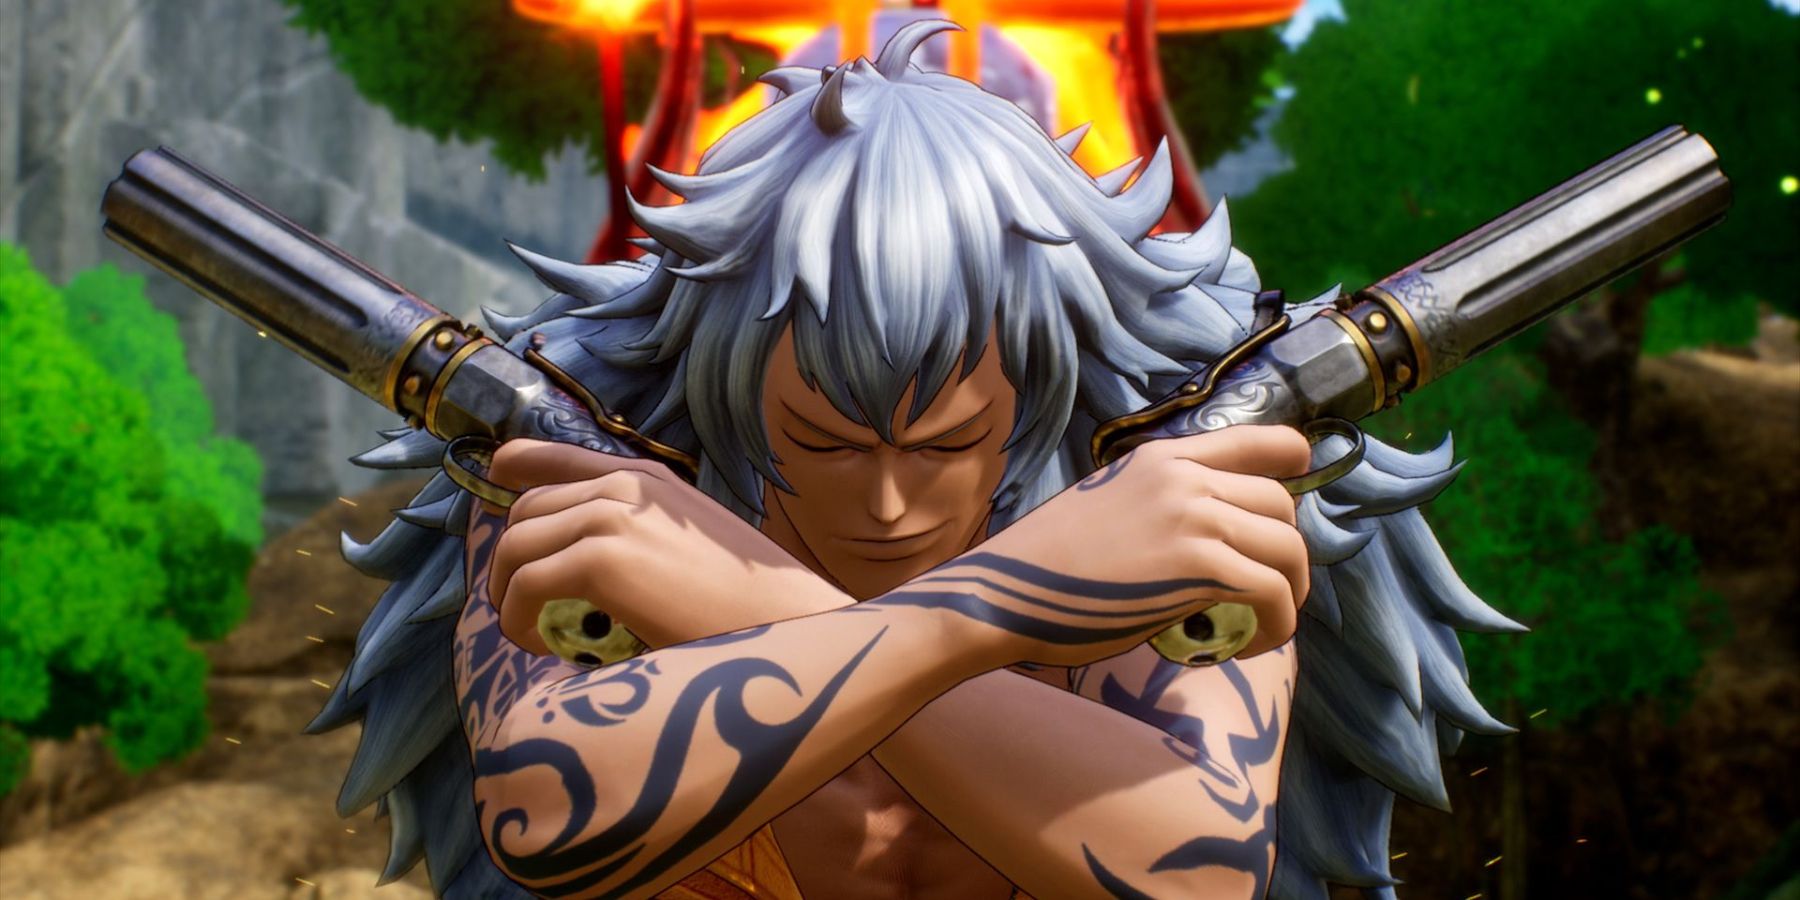 New One Piece character Adio is seen holding two pistols across their chest with an enemy exploding behind them, seen above his silver hair.